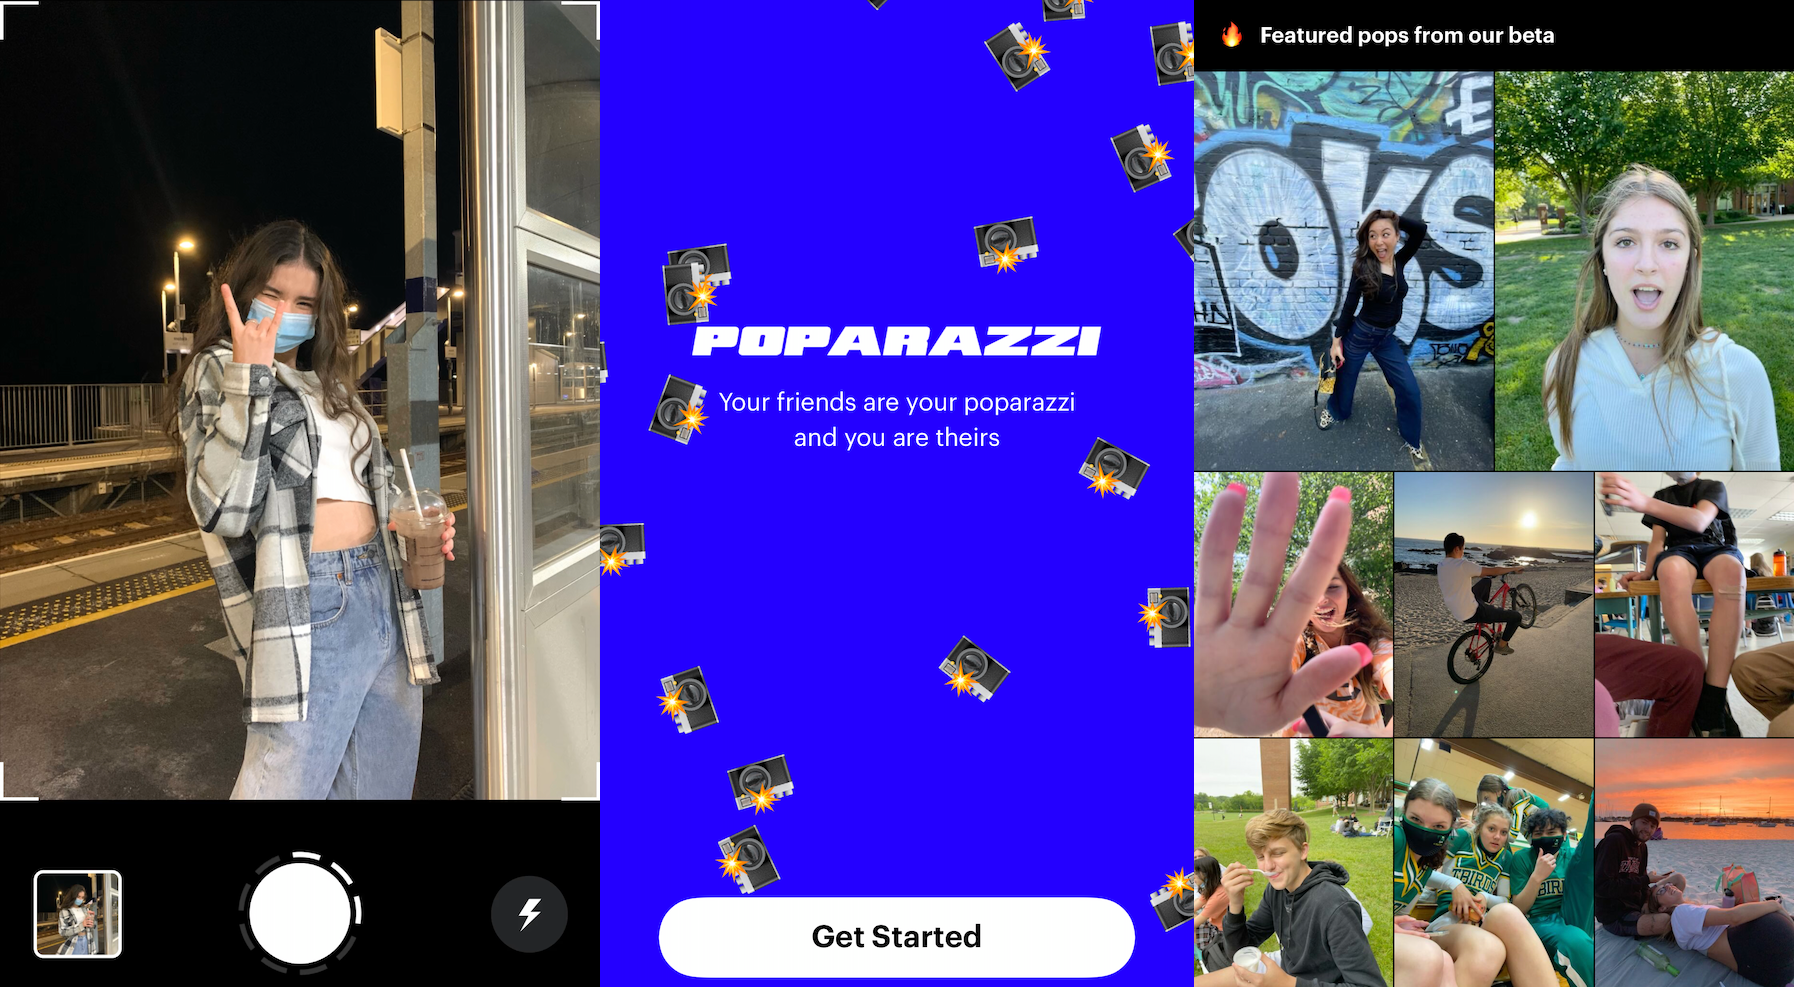 Poparazzi photo app blows up by banning selfies